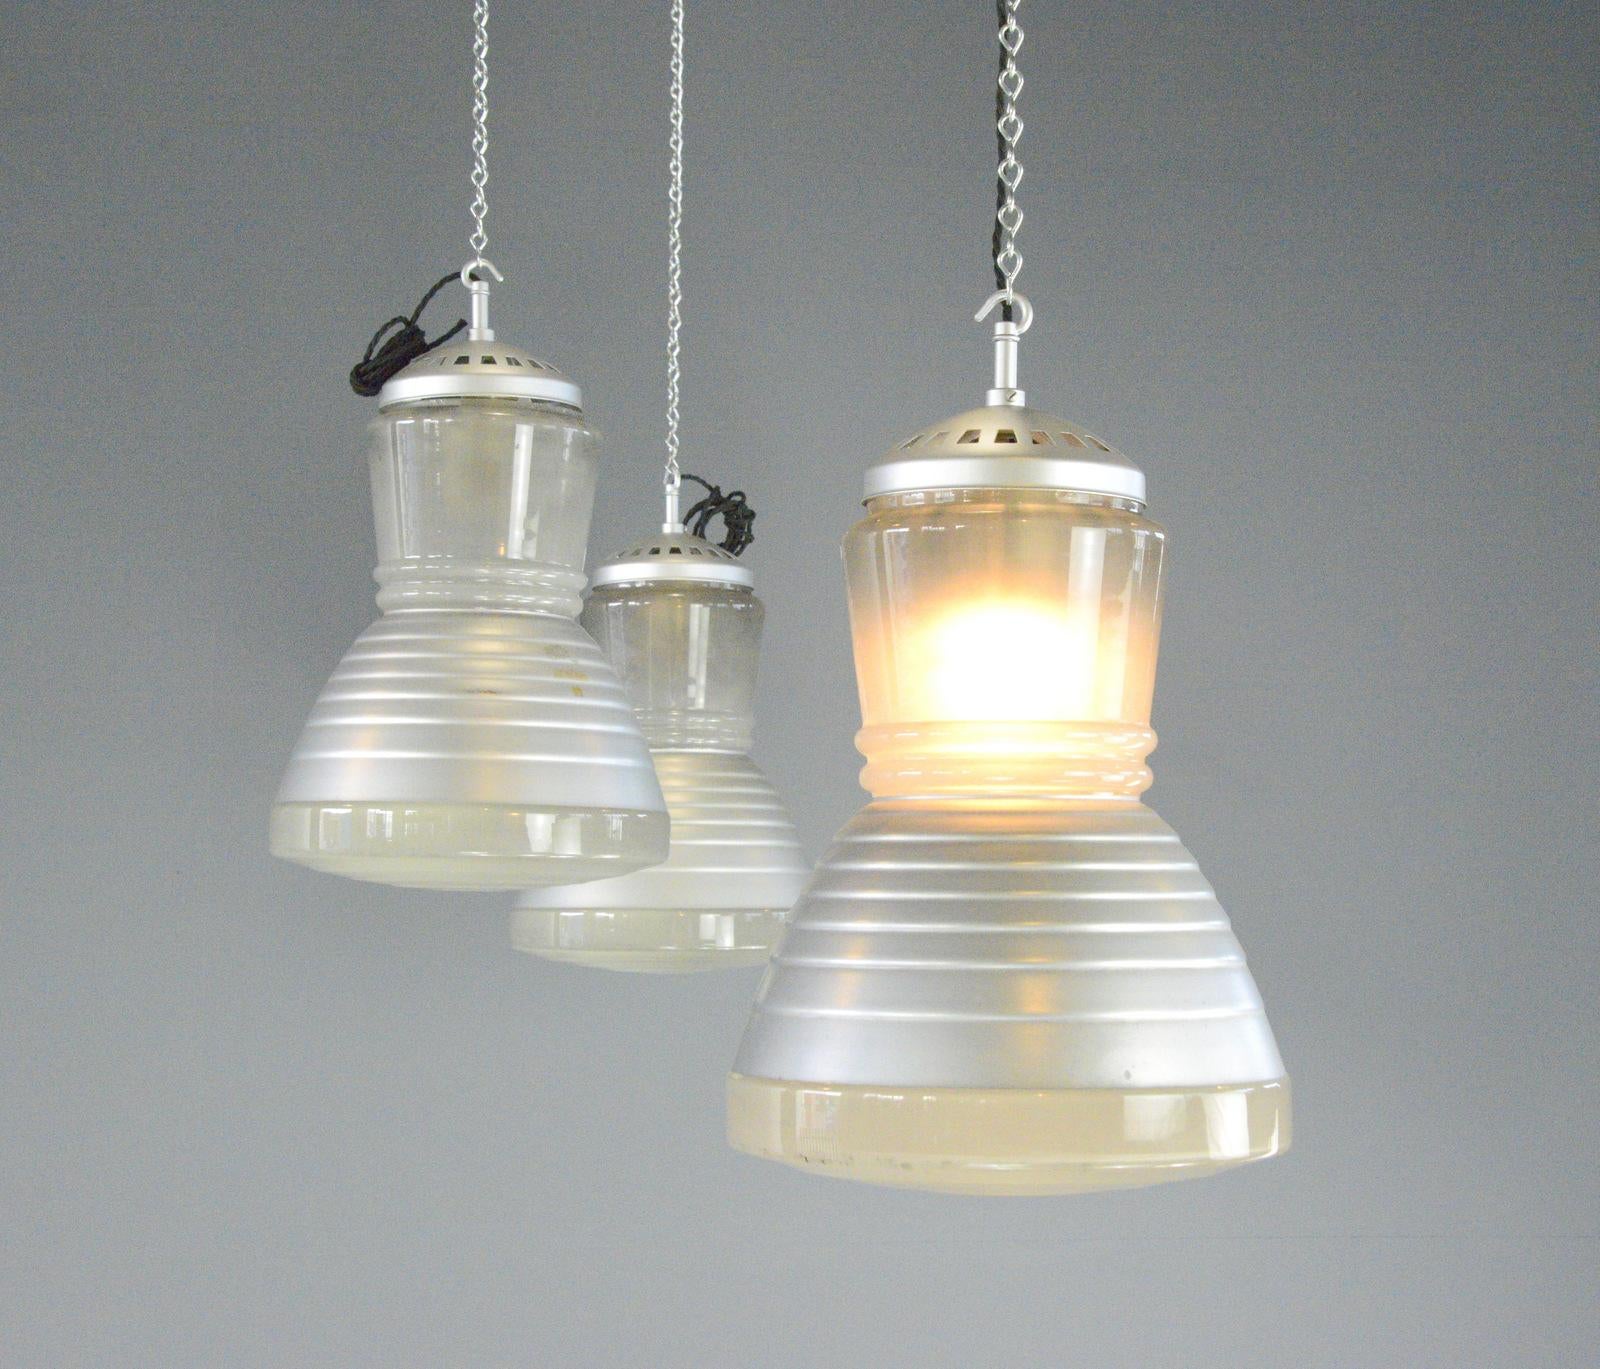 Pendant Lights By Adolf Meyer For Zeiss Ikon Circa 1930s In Good Condition For Sale In Gloucester, GB